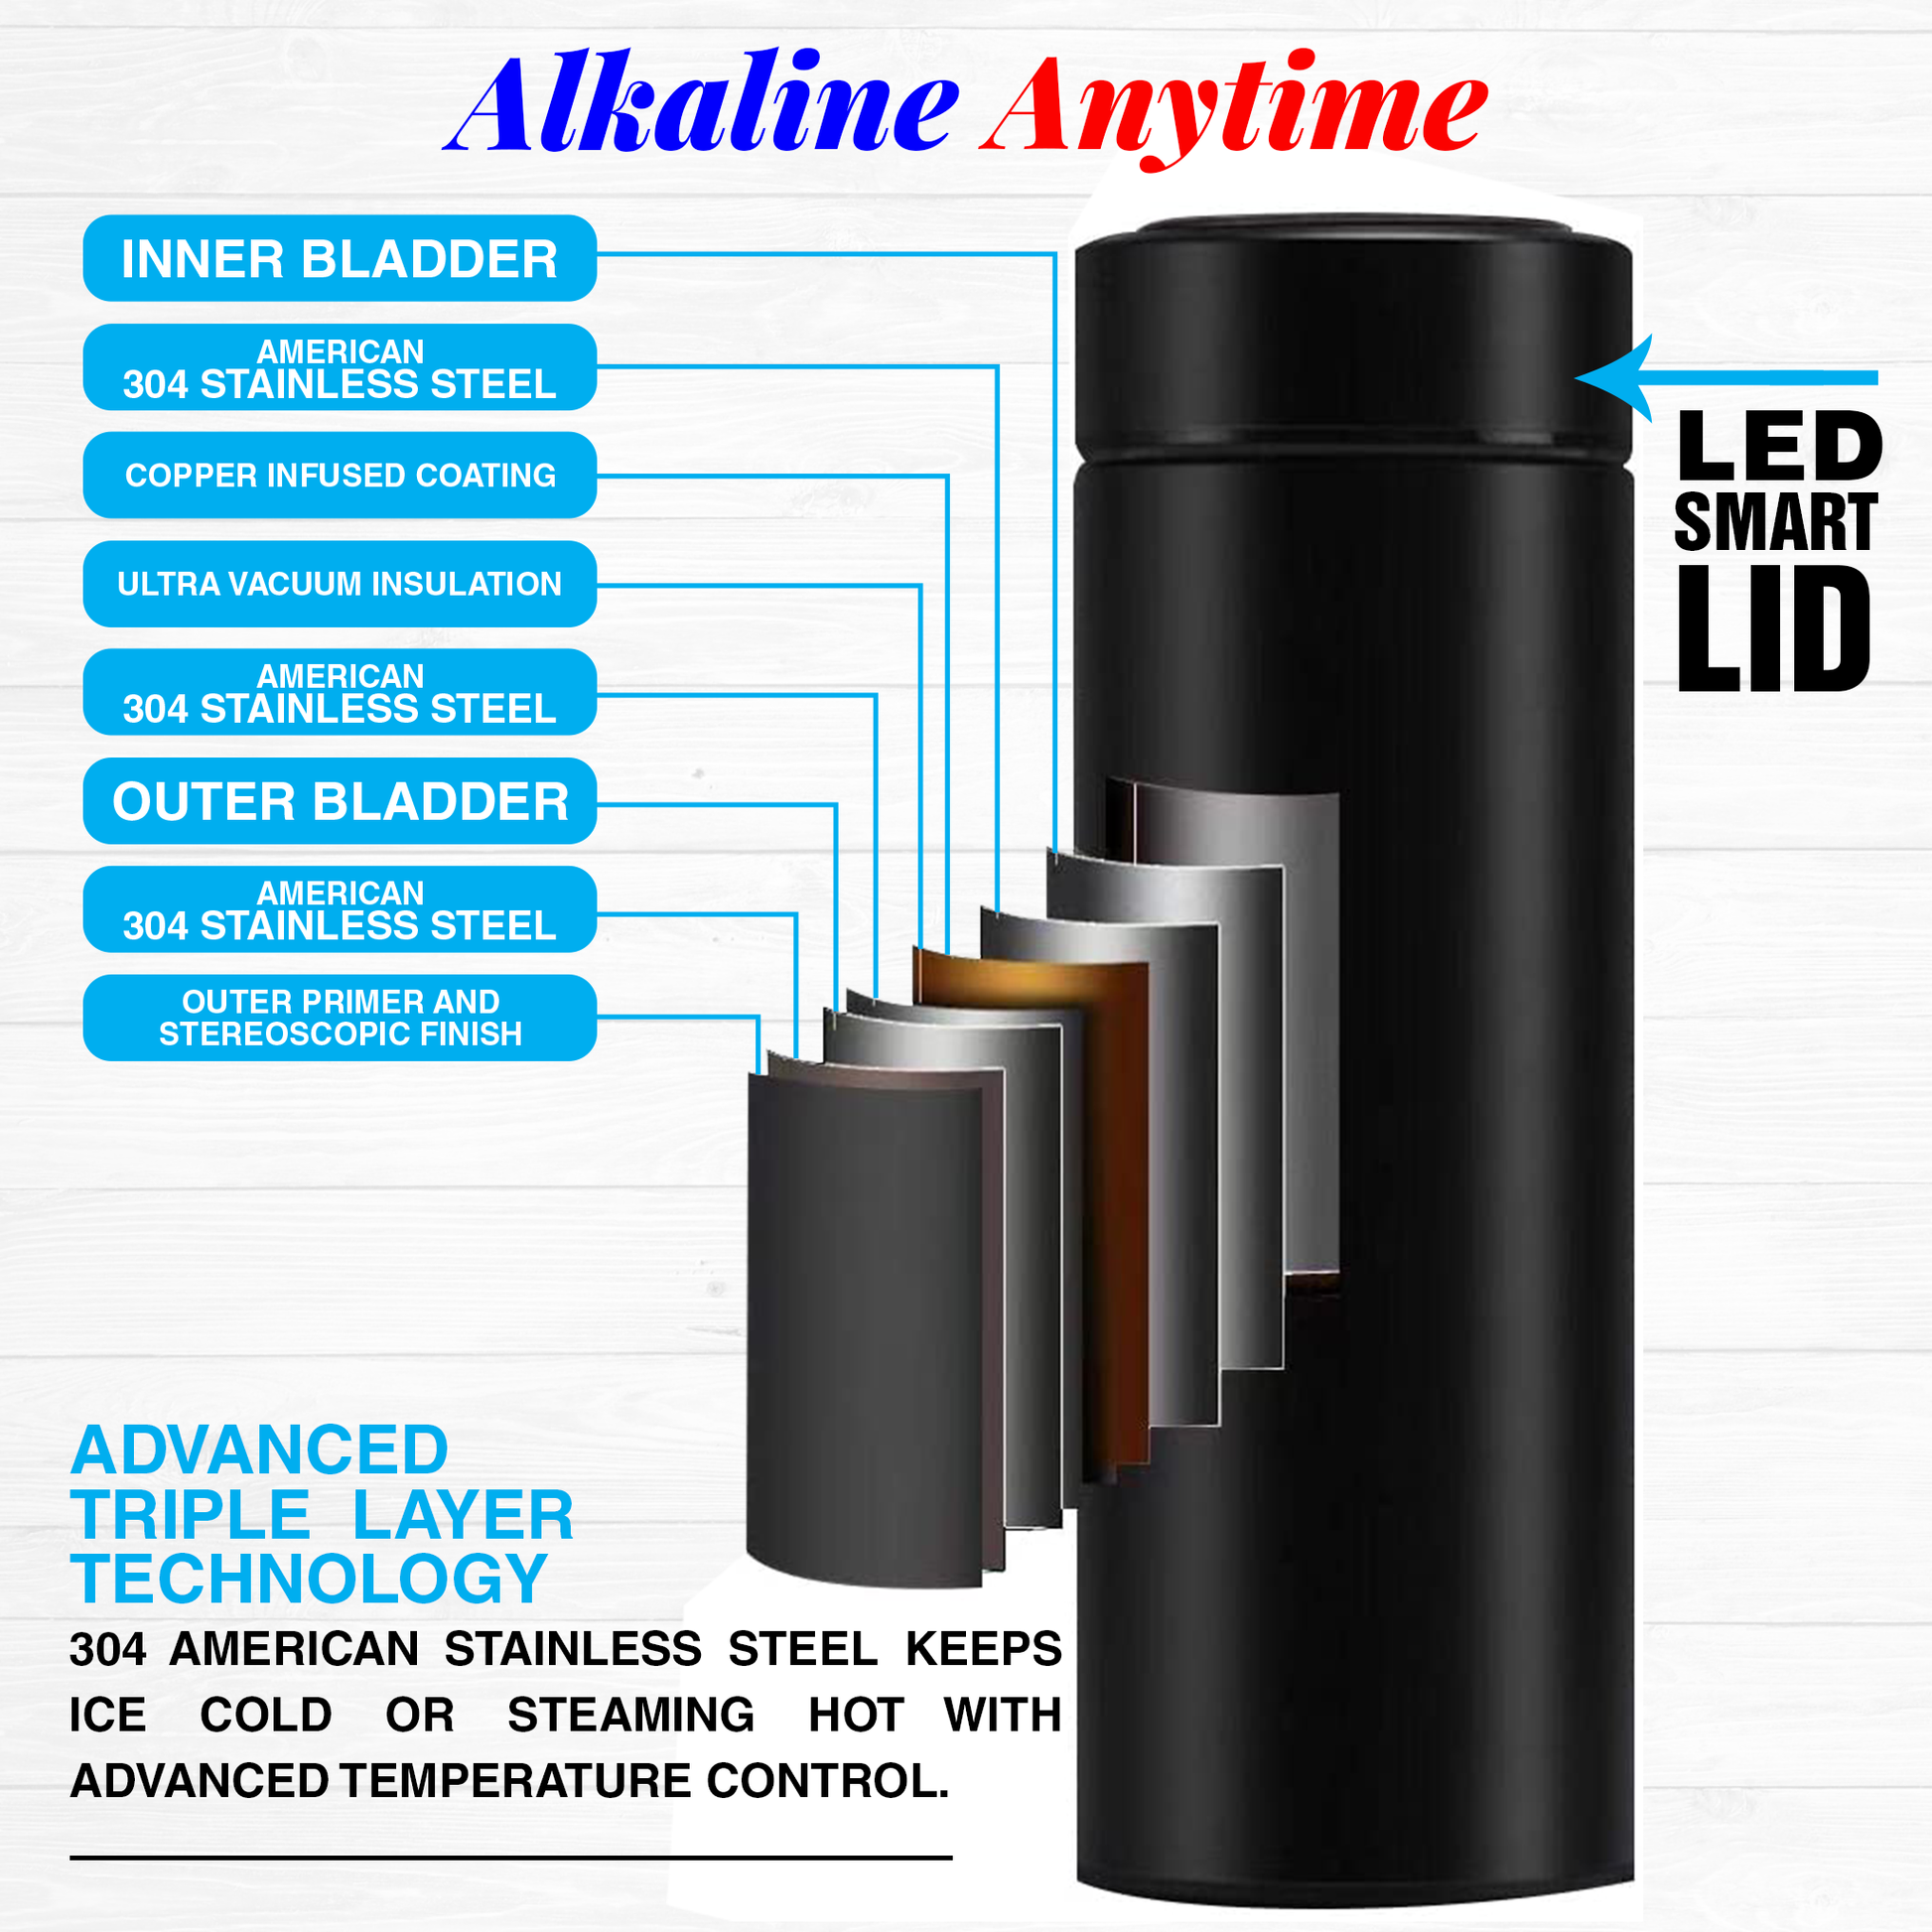 Executive Water Bottle Flask with 2 Lids (LED Display & Stainless Steel Lids) - Alkaline Anytime